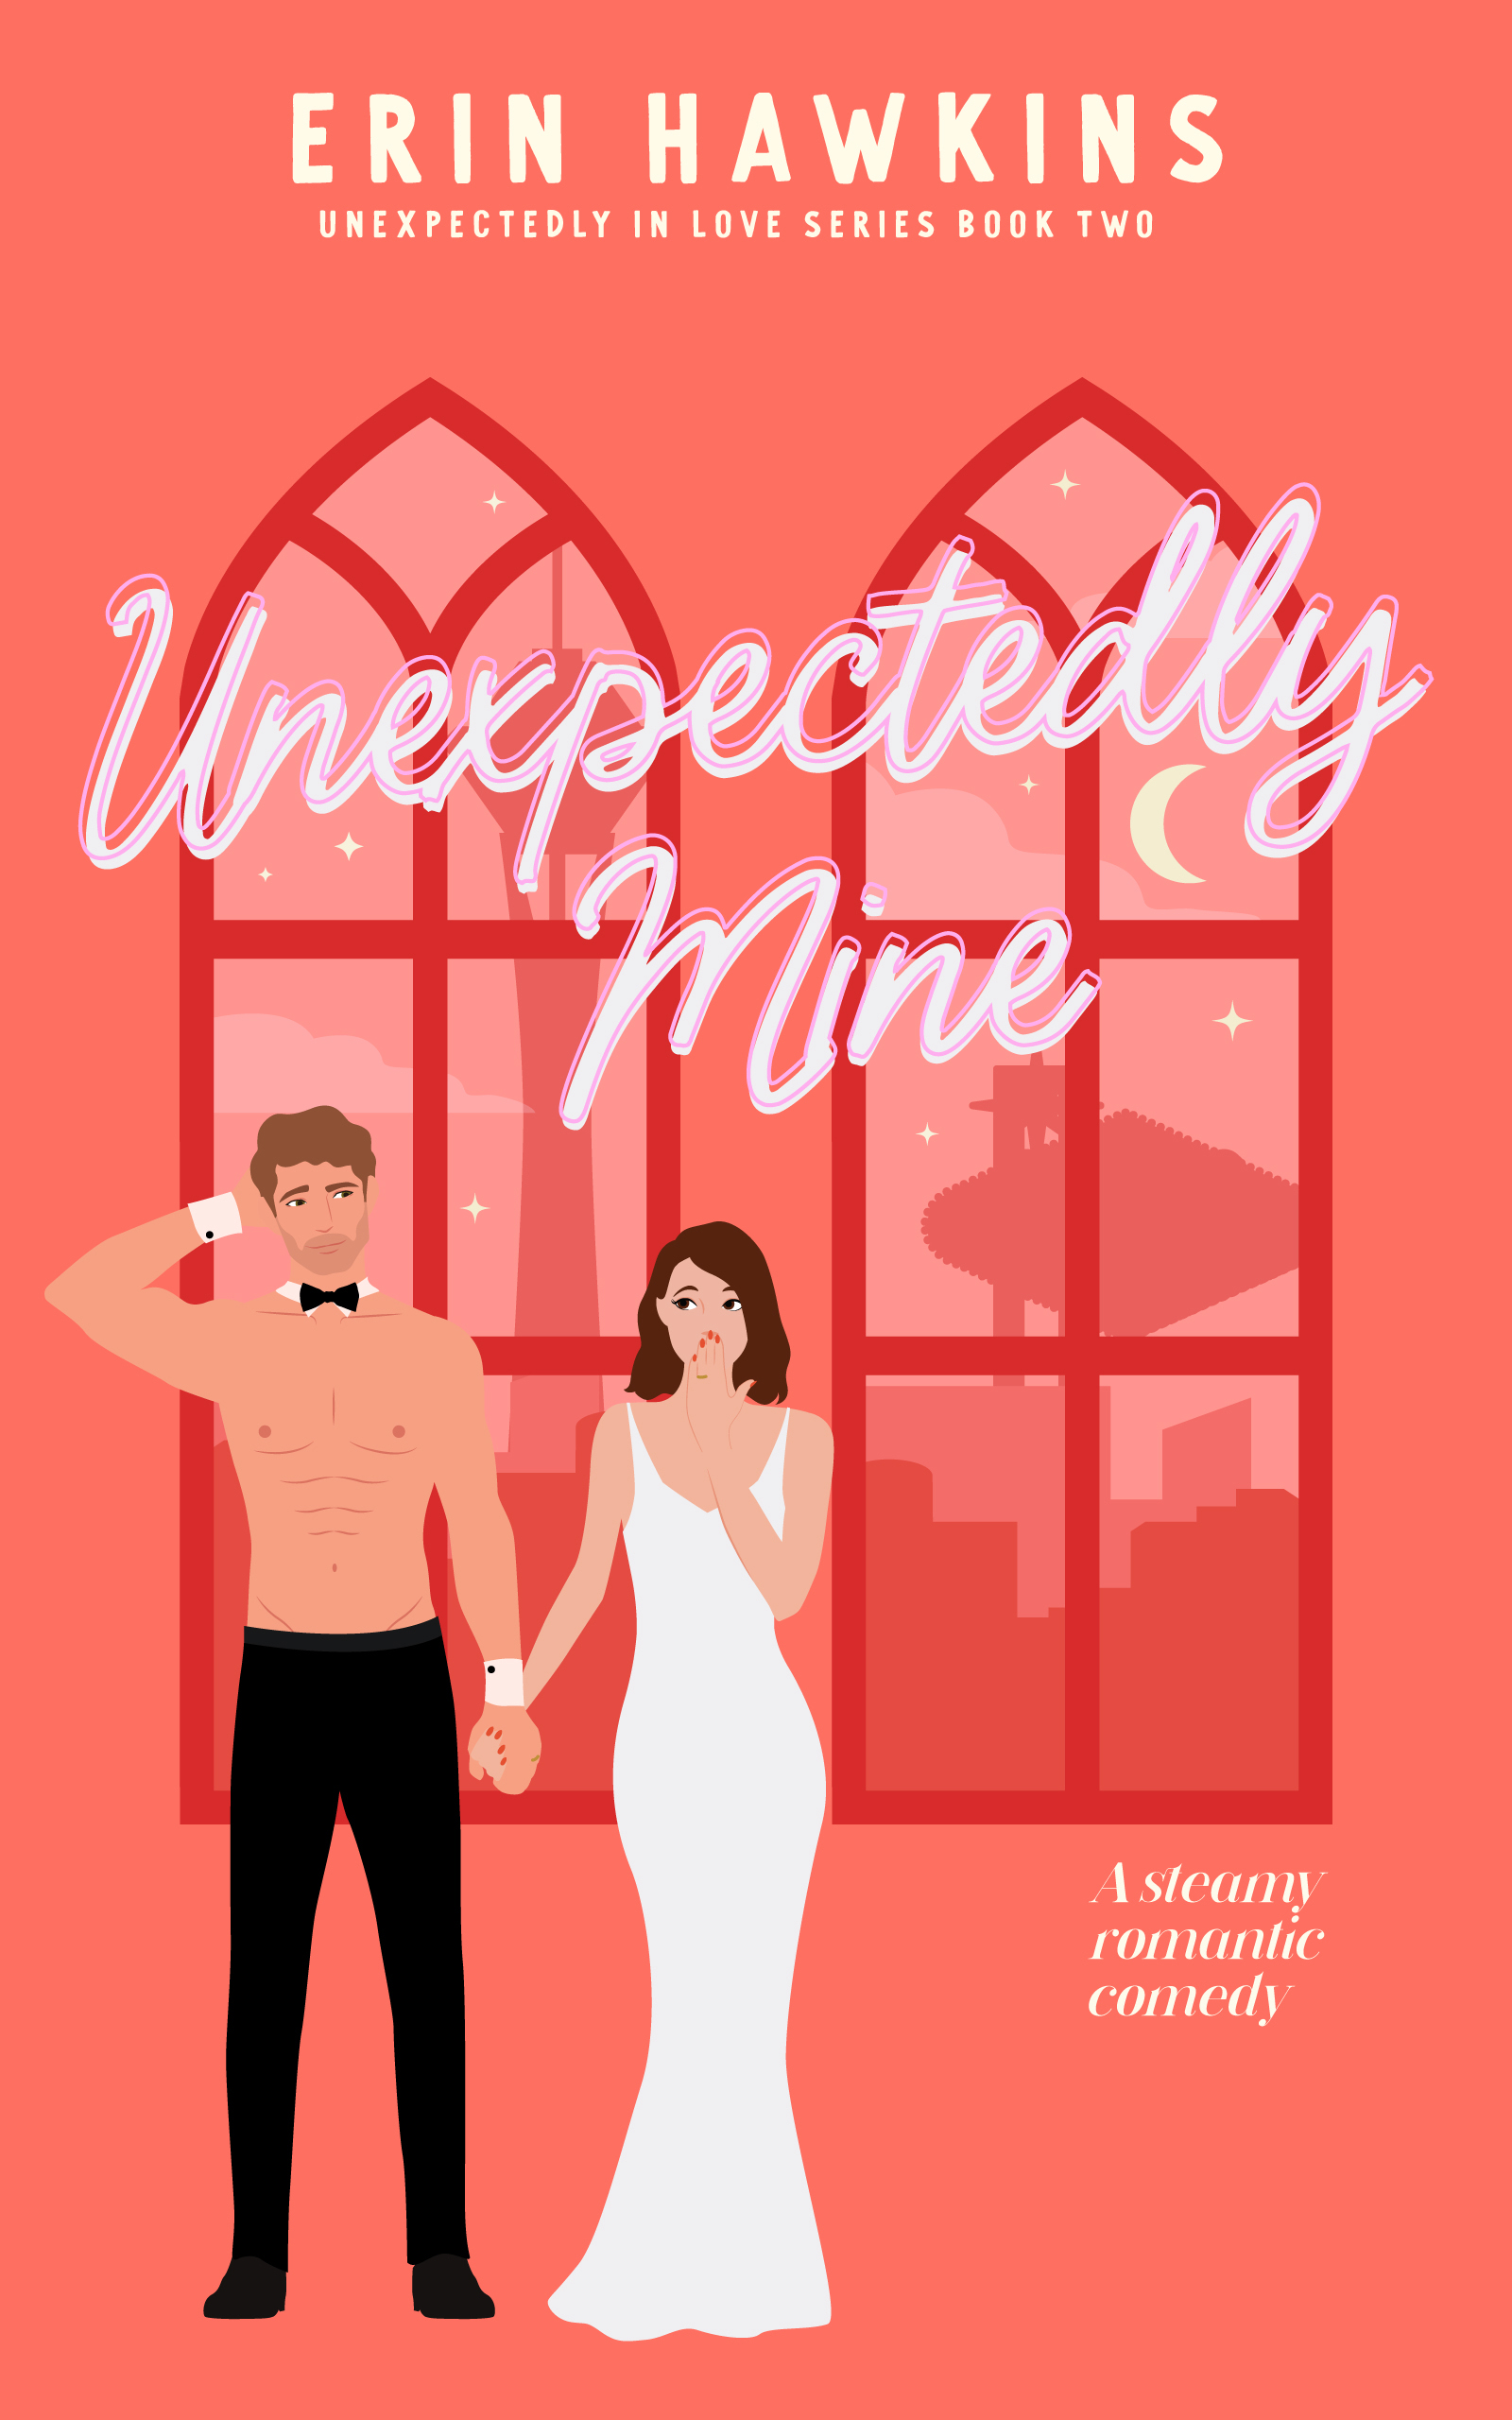 Unexpectedly Mine by Erin Hawkins